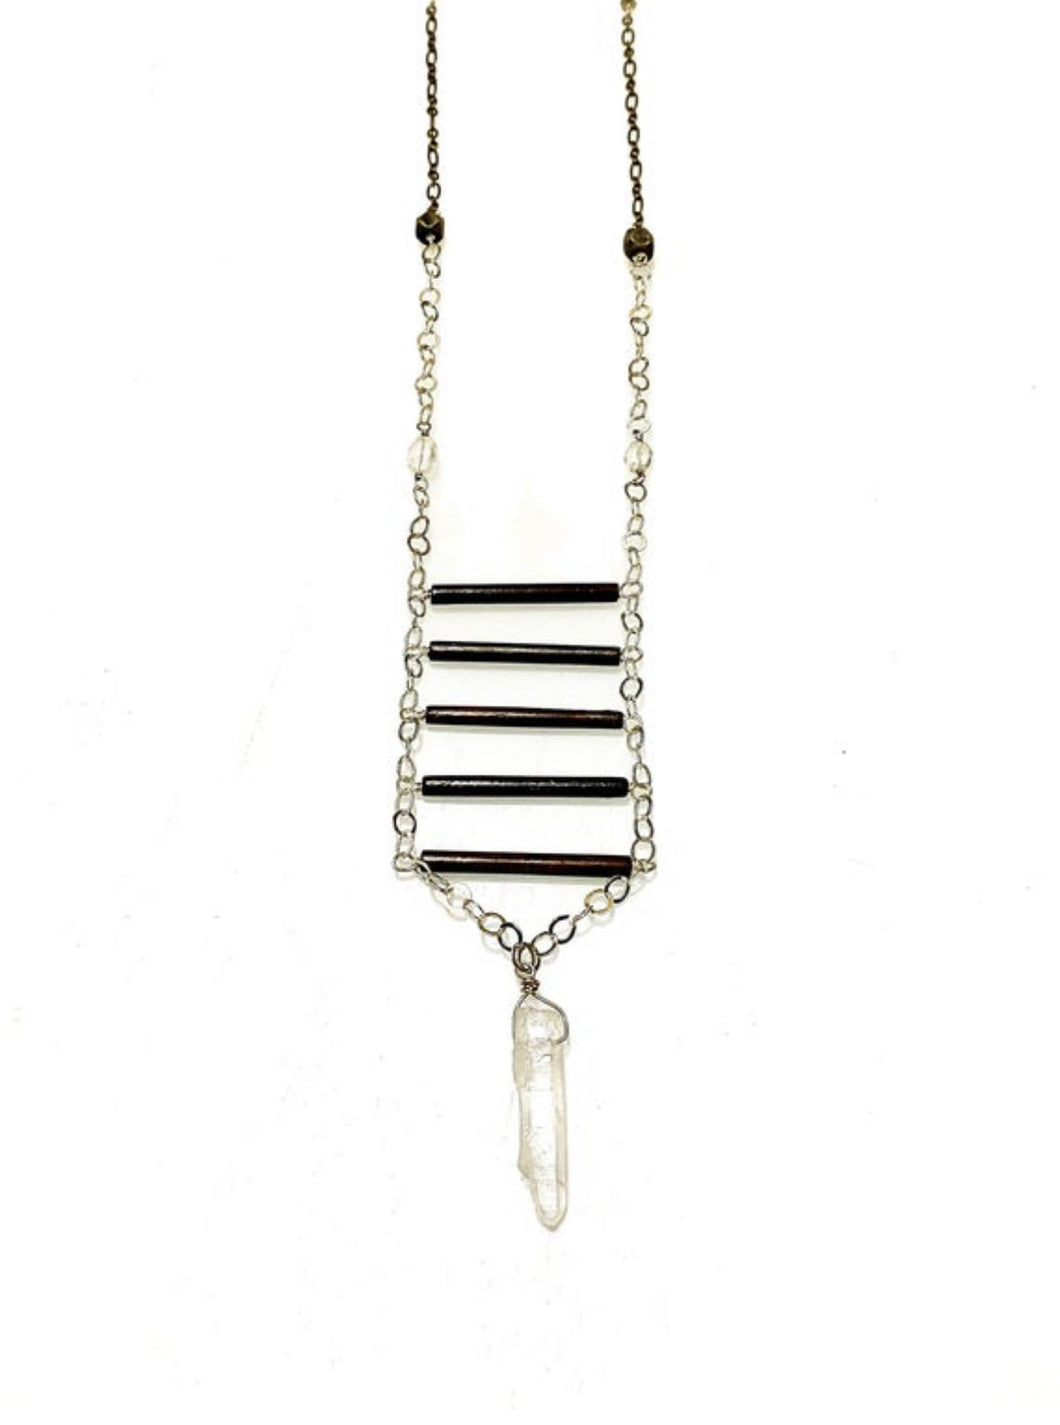 Park Slope Necklace - Obscuro Jewelry - sterling silver and bronze chain